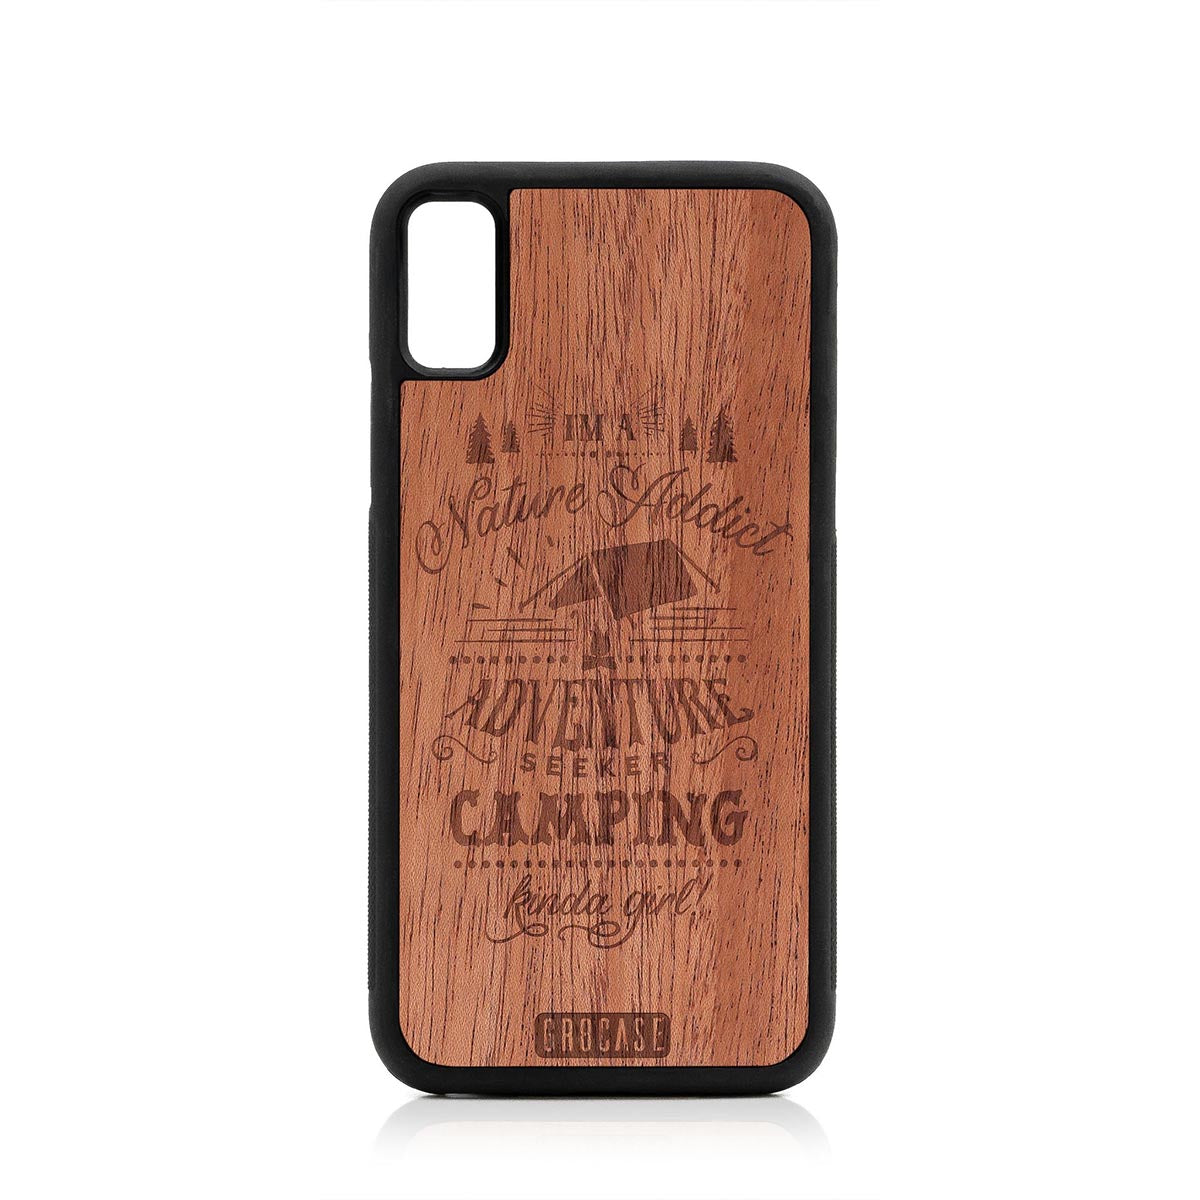 I'm A Nature Addict Adventure Seeker Camping Kinda Girl Design Wood Case For iPhone XS Max by GR8CASE